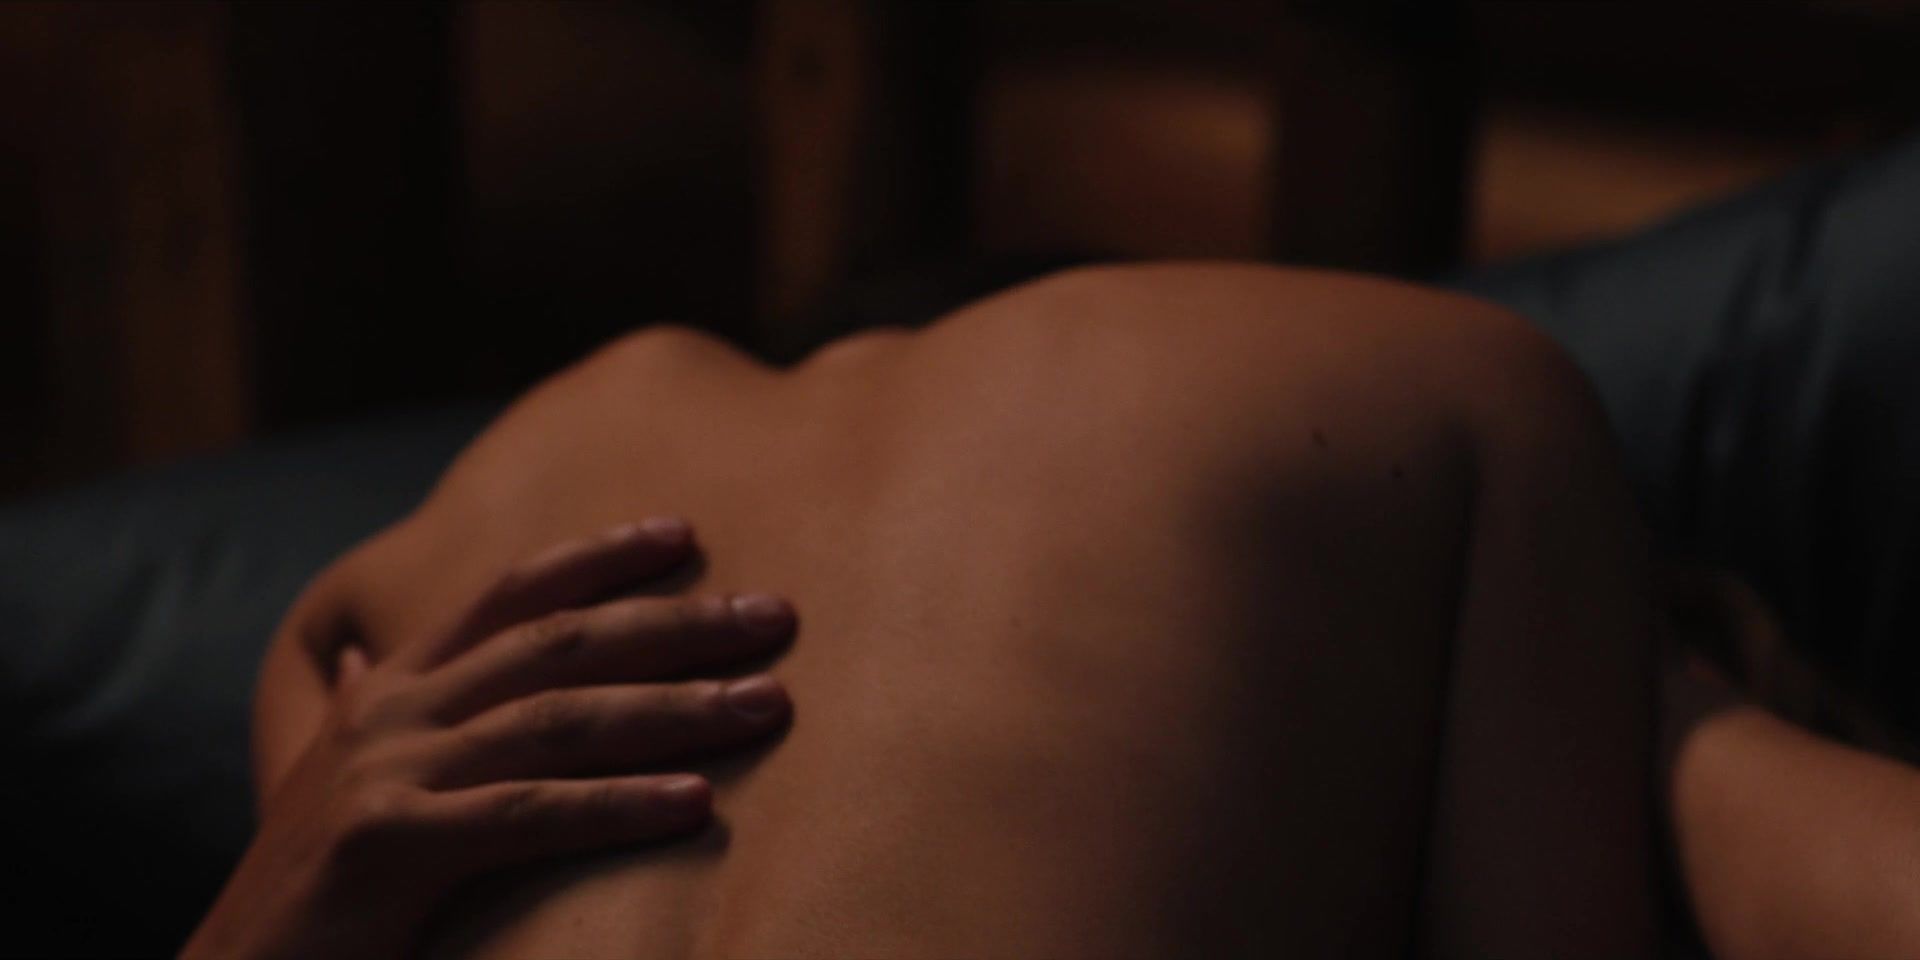 Sex Party Kelsey Asbille nude - Yellowstone s02e07 (2019) XHamsterCams - 2